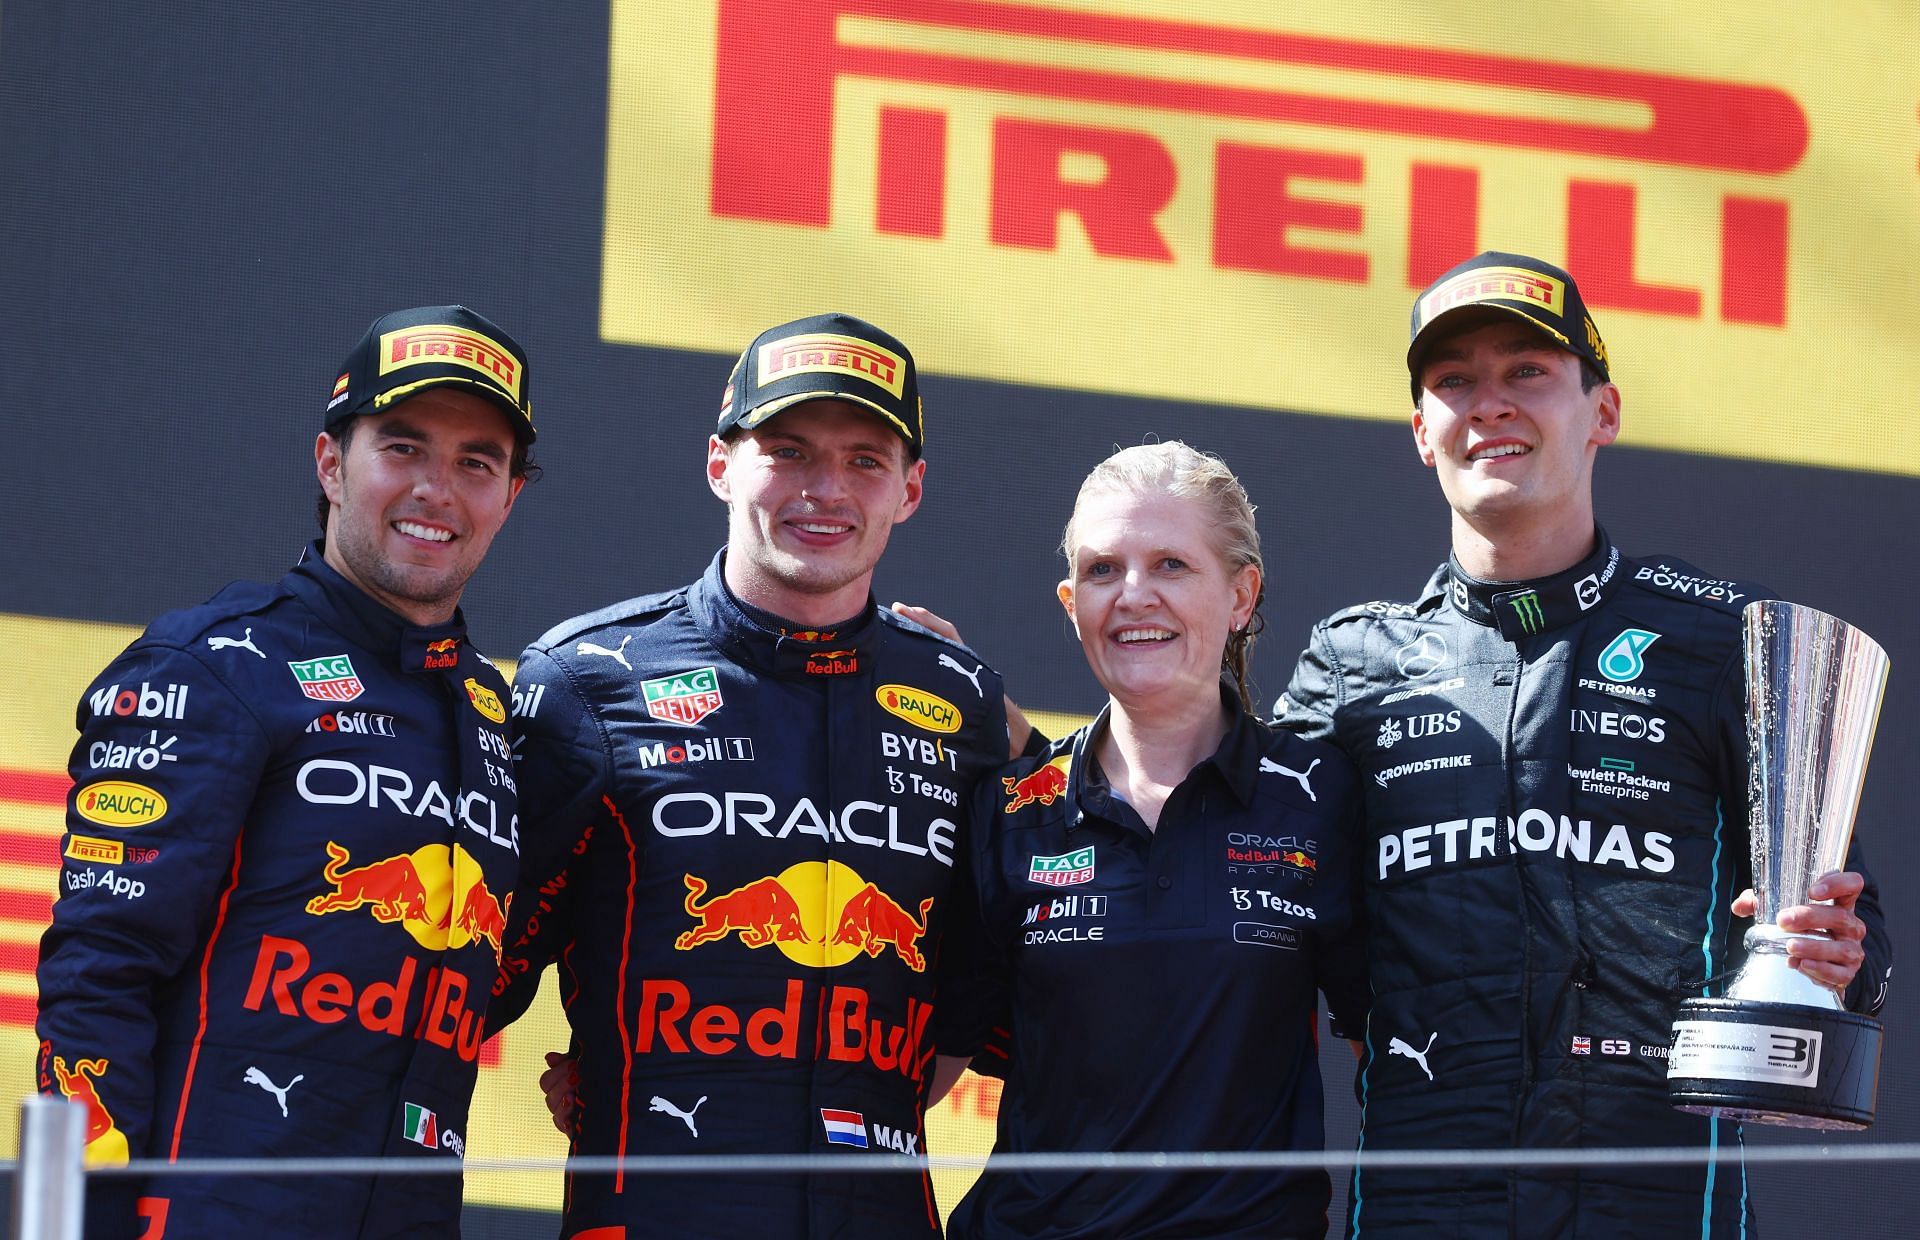 (L to R) Sergio Perez, Max Verstappen, Joanna Fleet, and George Russell celebrate on the podium during the F1 Grand Prix of Spain at Circuit de Barcelona-Catalunya on May 22, 2022, in Barcelona, Spain (Photo by Mark Thompson/Getty Images)